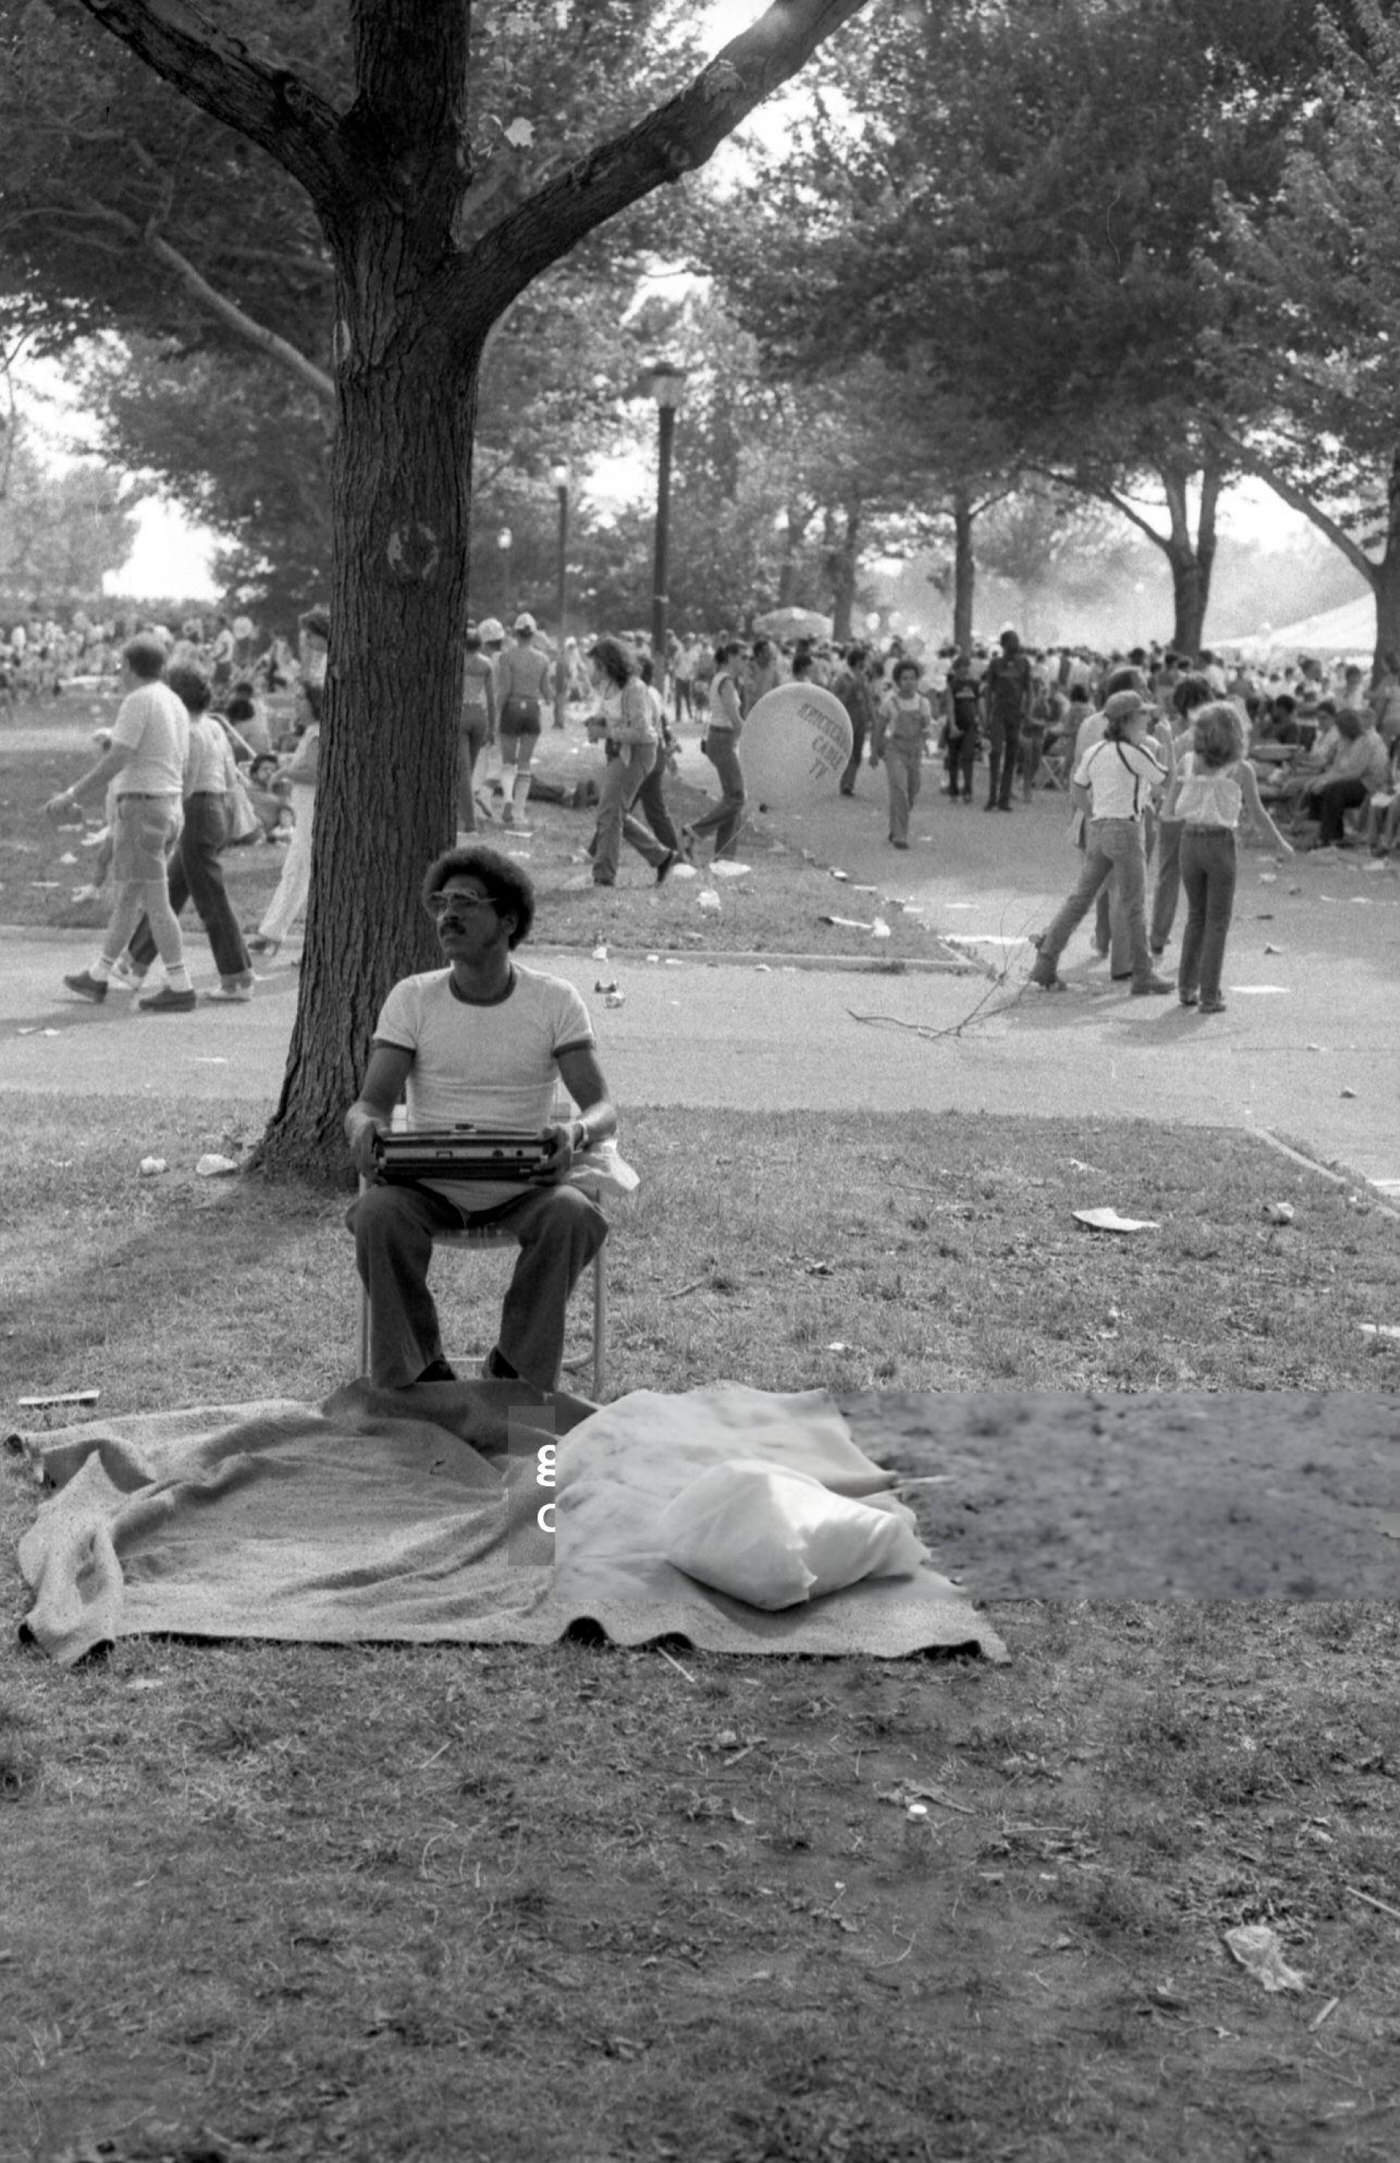 A Man Sits In A Chair With A Radio In His Lap In Flushing Meadows Park, Corona, Queens, 1980.